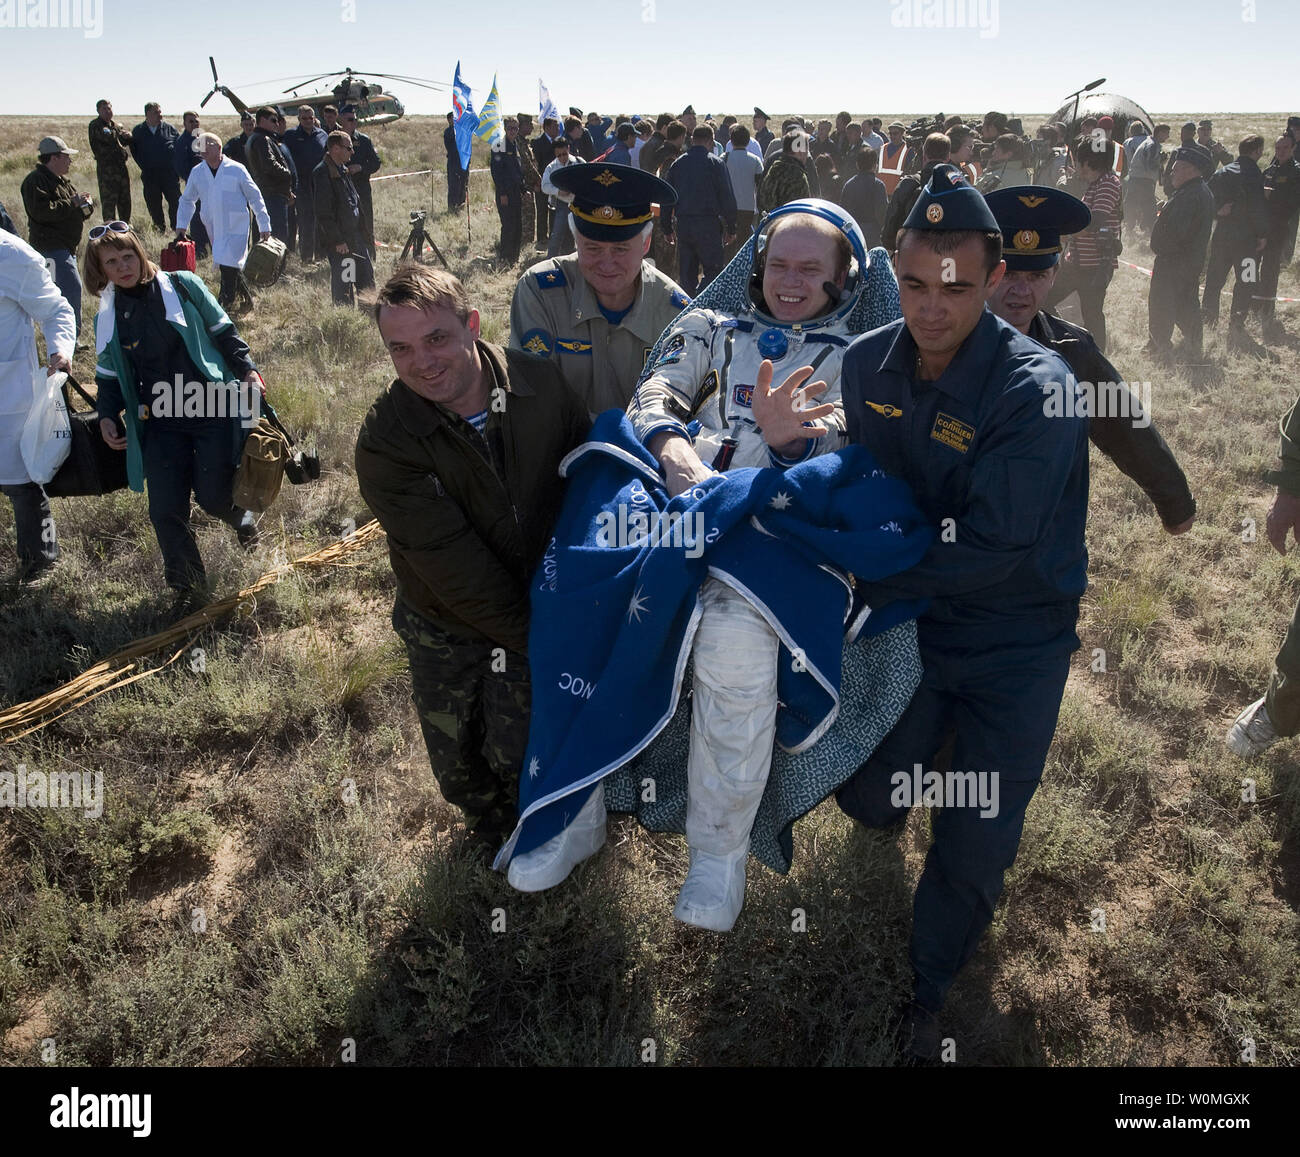 Expedition 23 Commander Oleg Kotov is carried in a chair to the medical tent just minutes after he and fellow crew members T.J. Creamer and Soichi Noguchi landed in their Soyuz TMA-17 capsule near the town of Zhezkazgan, Kazakhstan on June 2, 2010. NASA Astronaut Creamer, Russian Cosmonaut Kotov and Japanese Astronaut Noguchi are returning from six months onboard the International Space Station where they served as members of the Expedition 22 and 23 crews. UPI//Bill Ingalls/NASA Stock Photo